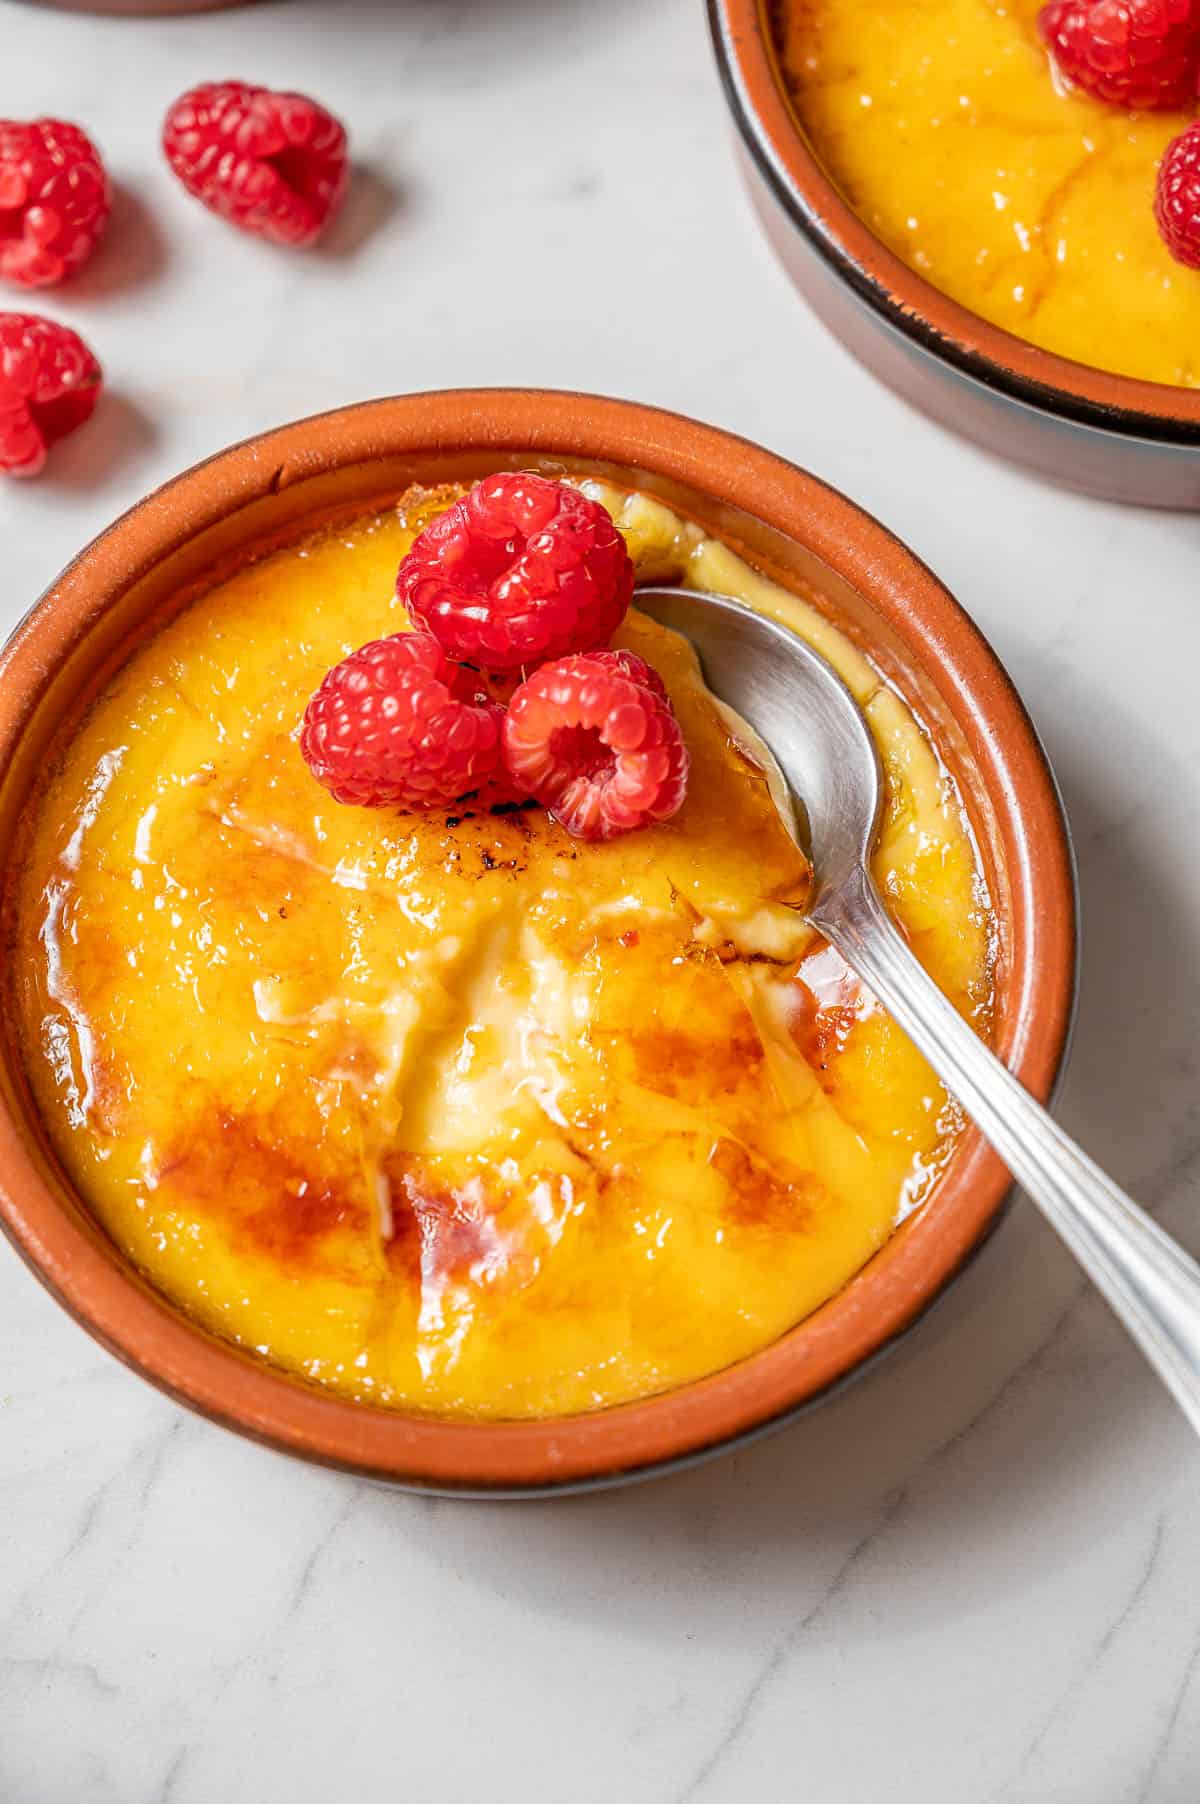 Crema Catalana (the Spanish creme brulee) in a clay dish with a few raspberries on top. A silver spoon cracked into the sugar crust.